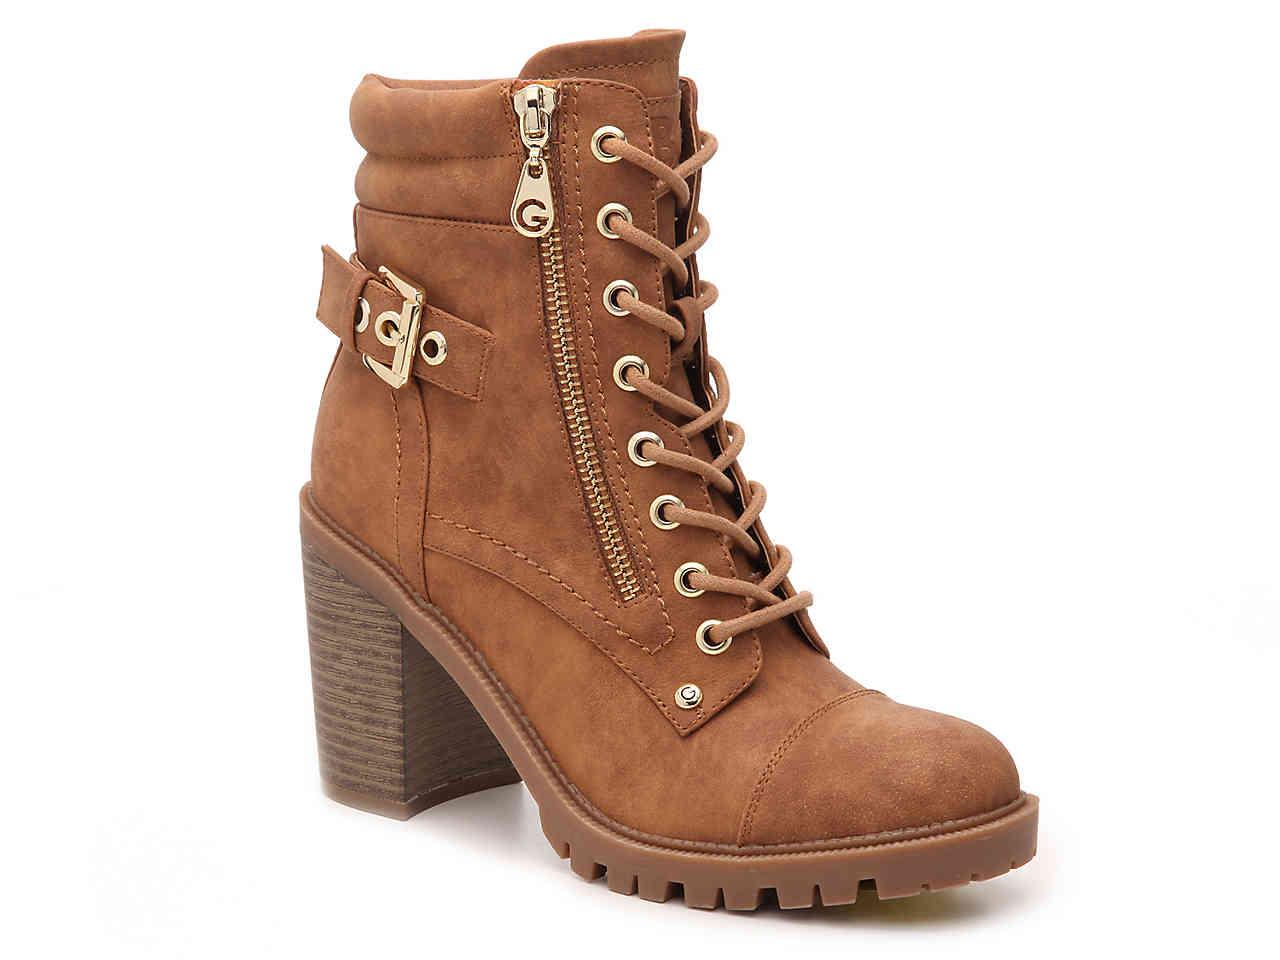 G by Guess Jaydyn Combat Boot in Cognac 